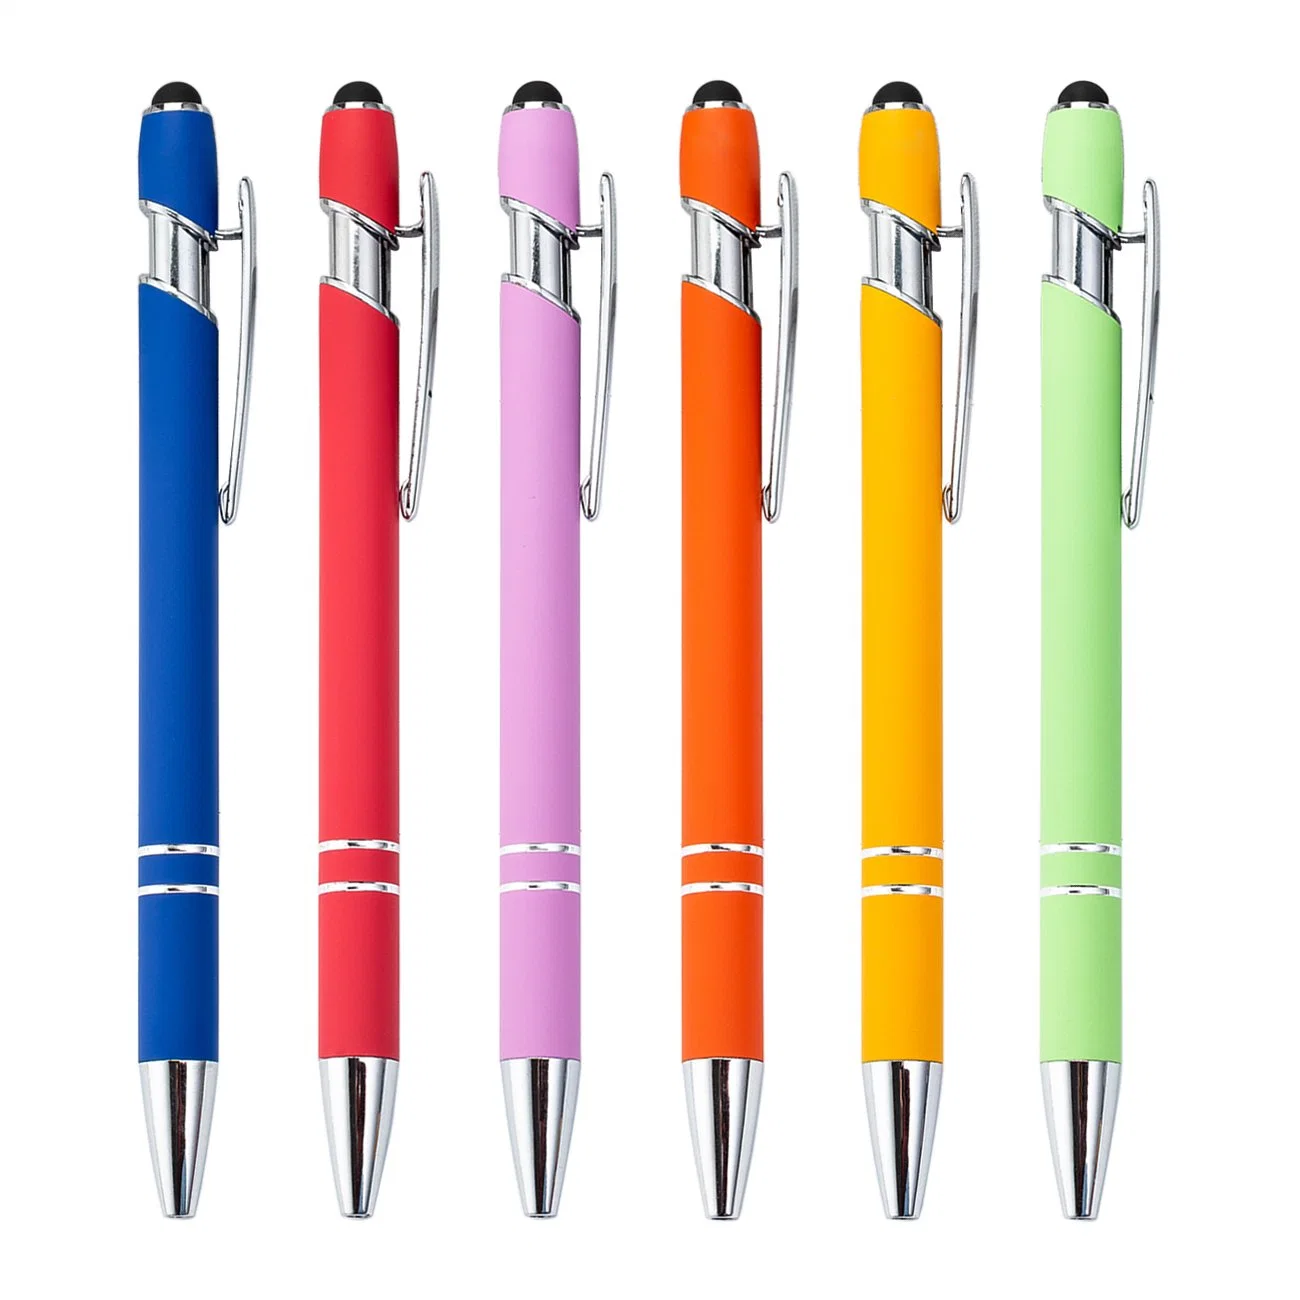 Hot Selling Promotional New Multifunction Ball Stylus Soft Touch Screen Pen 2 in 1 with Custom Logo Metal Ballpoint Pens